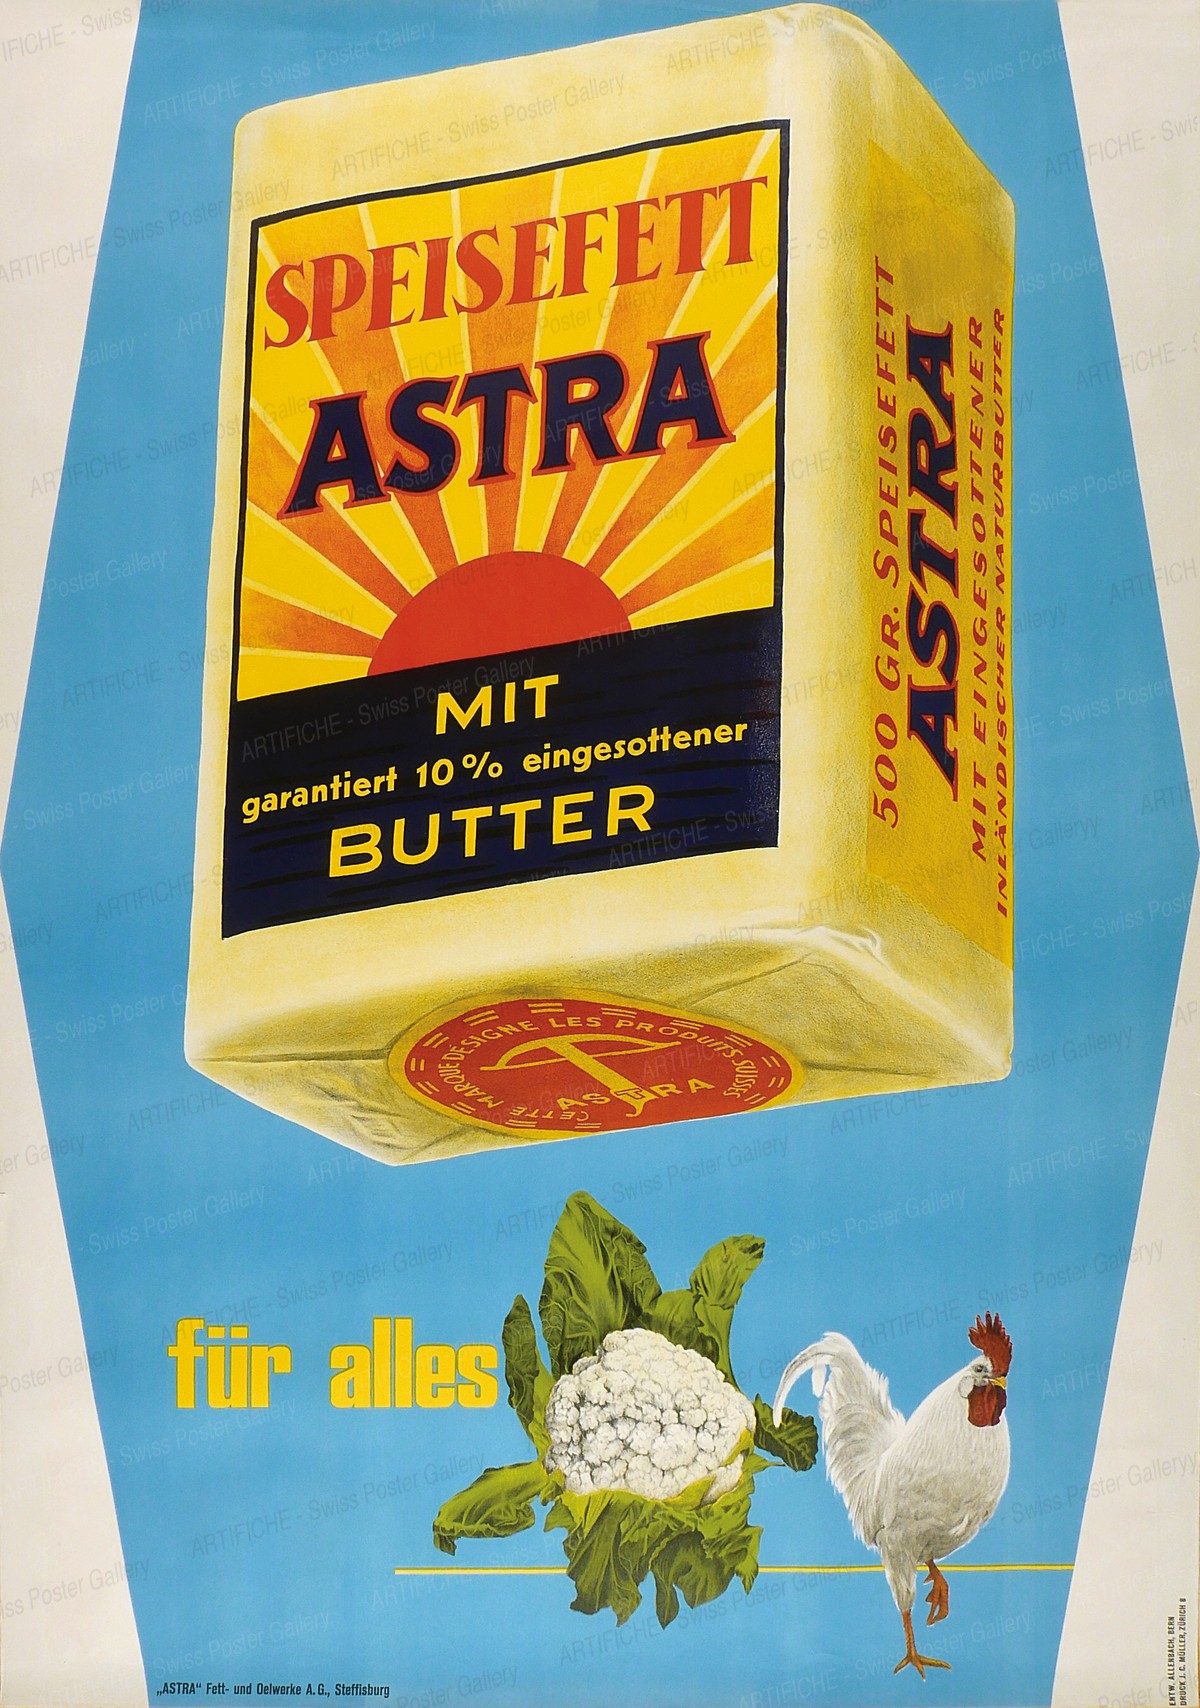 Astra cooking fat, Werner Allenbach